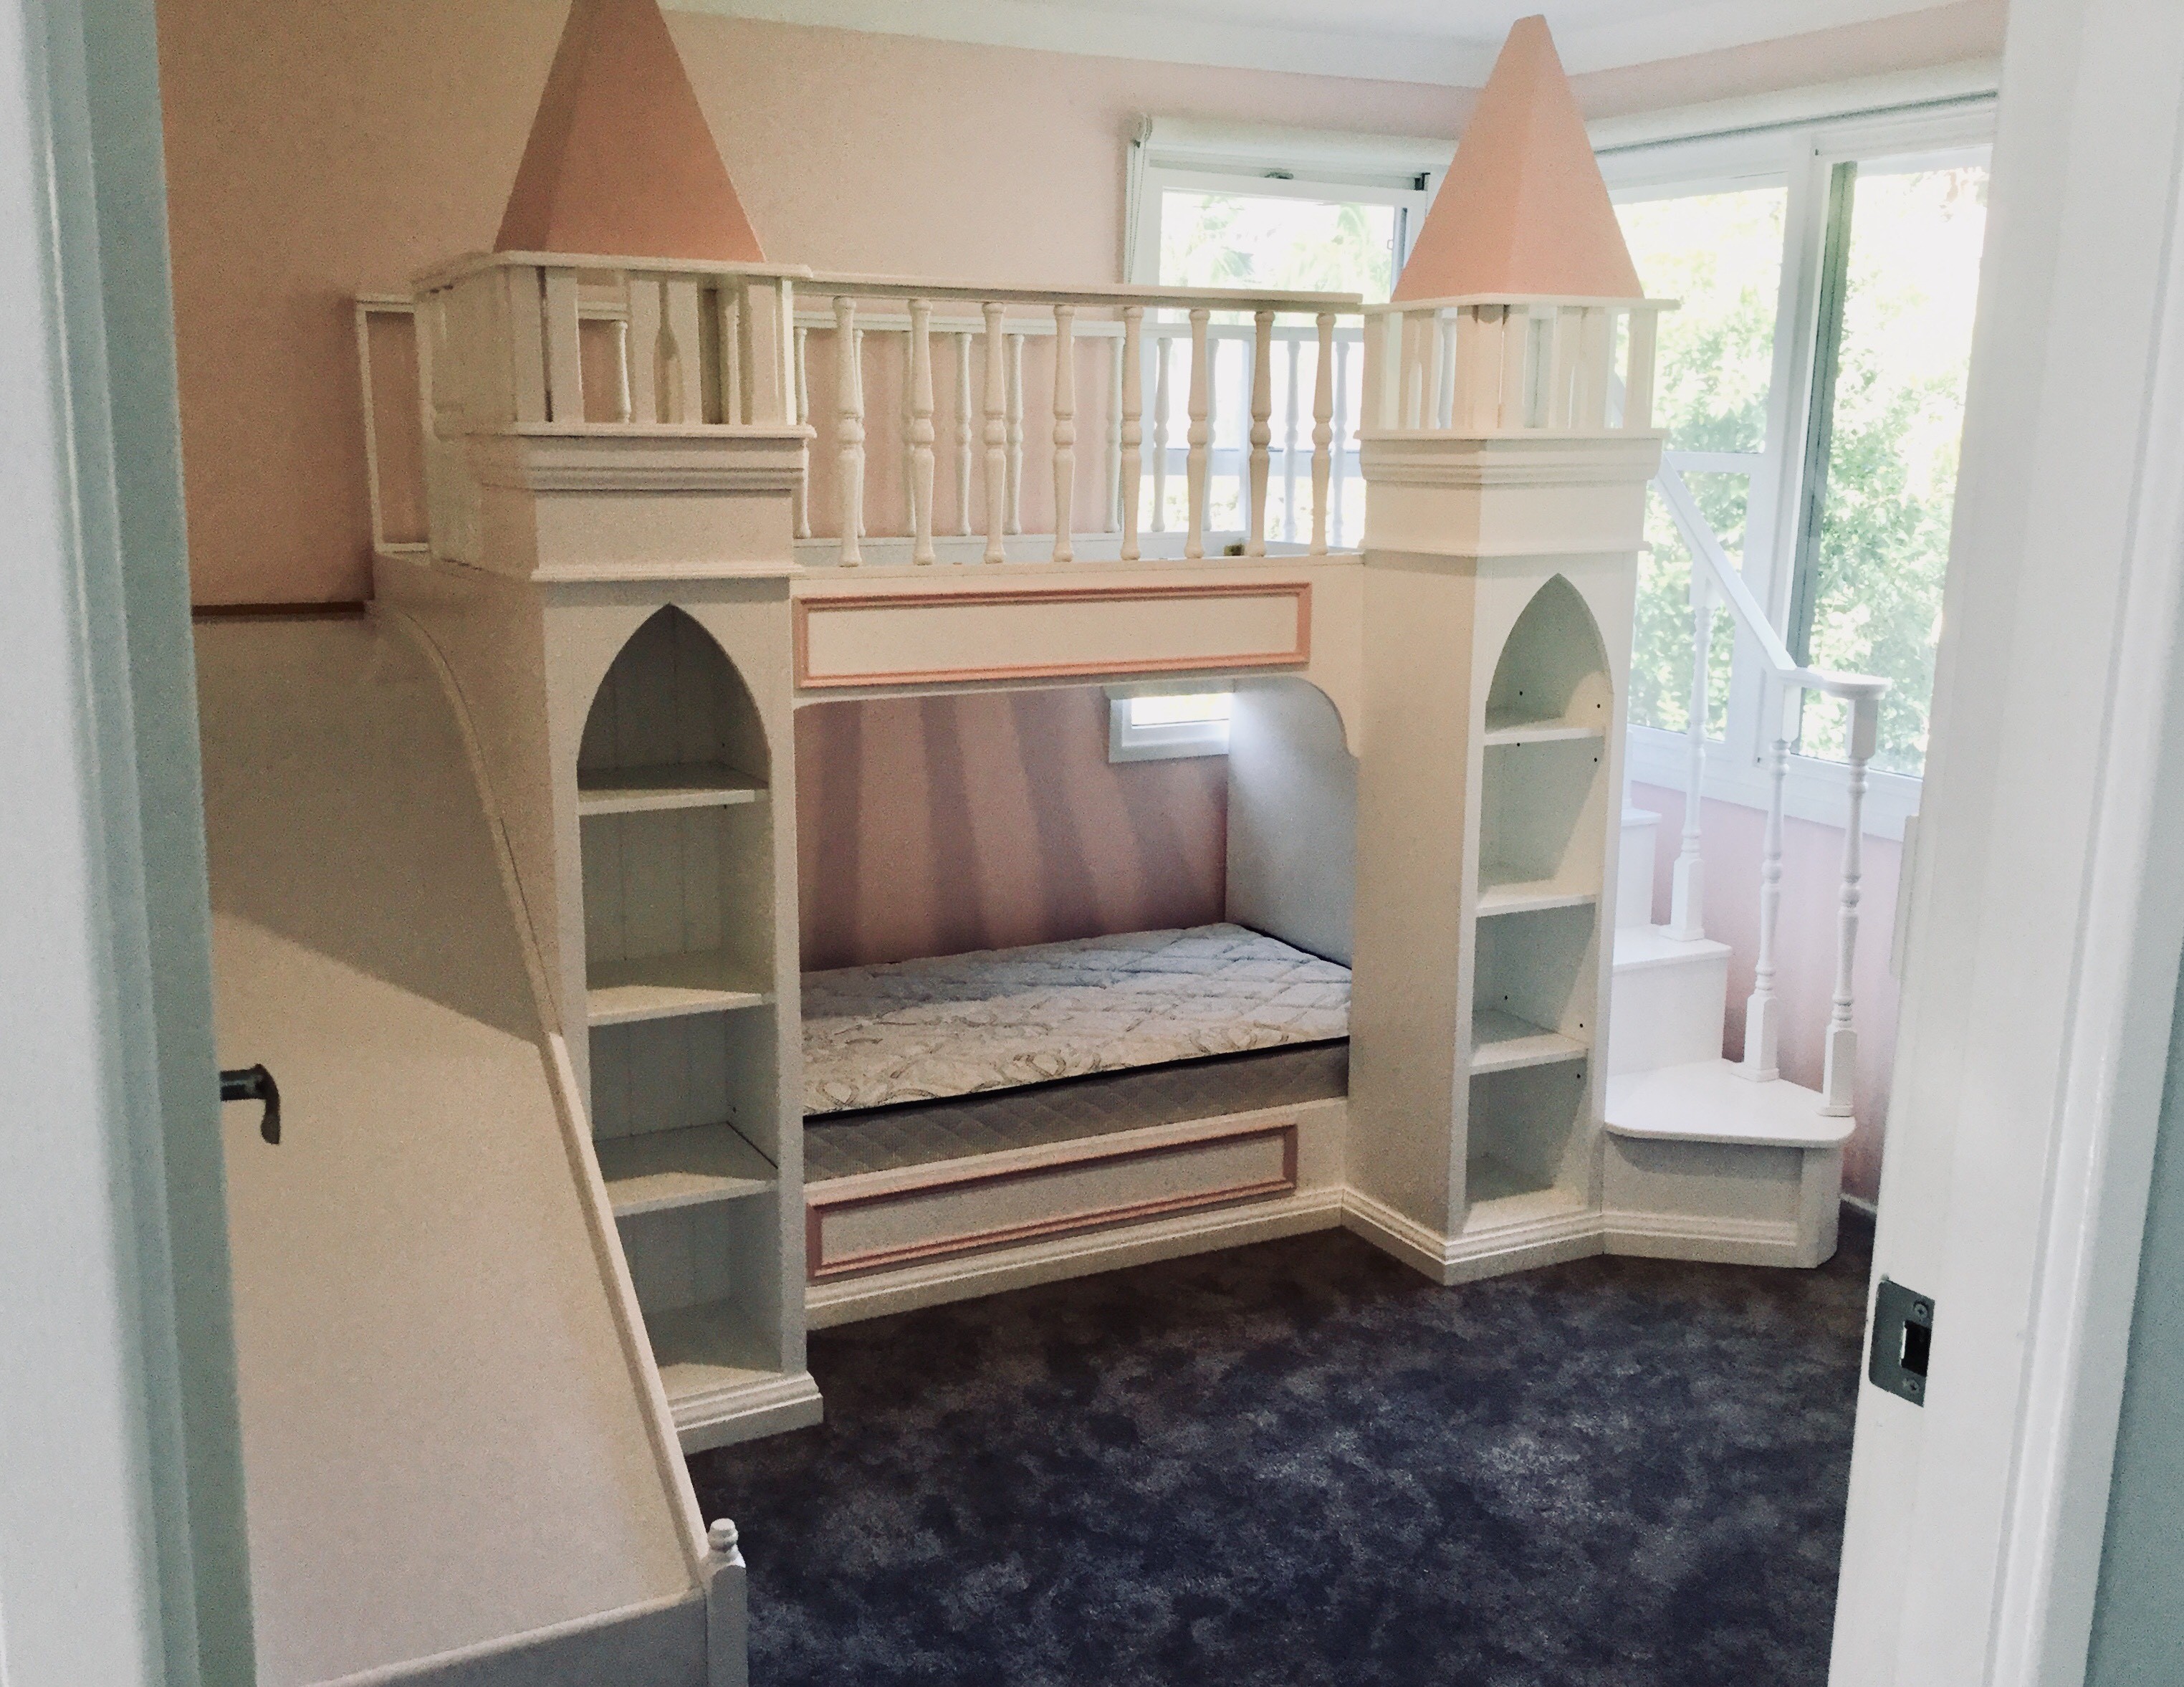 bunk bed with cubby underneath